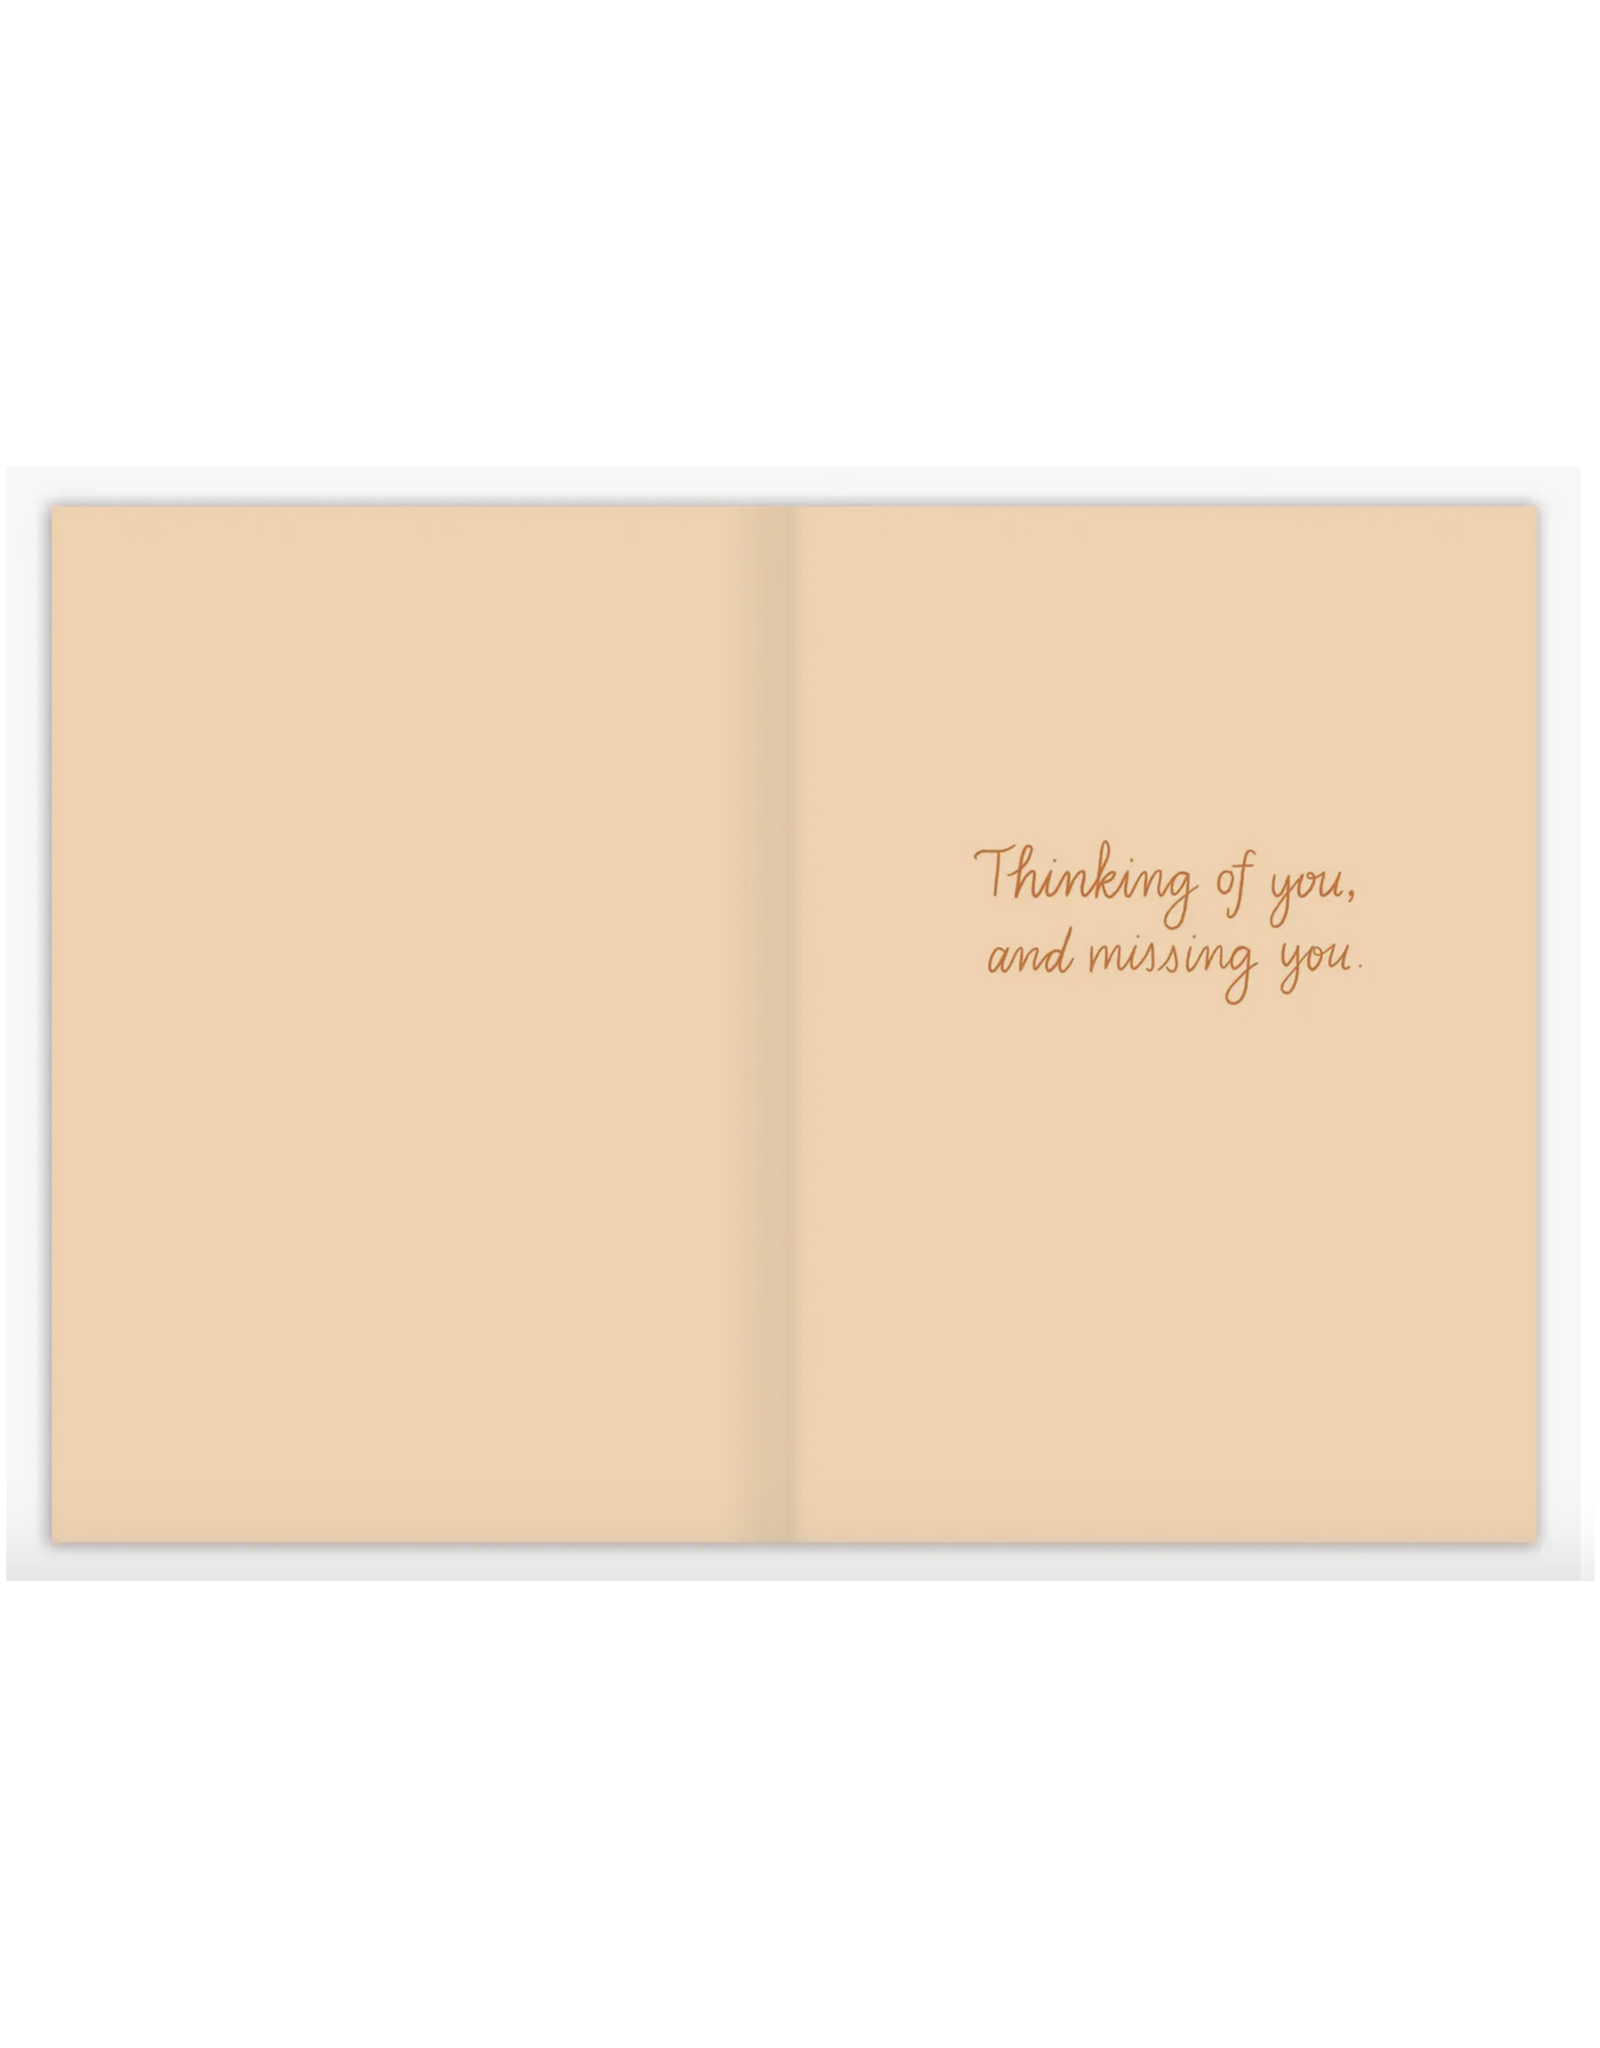 Hello My Friend Forest Greeting Card